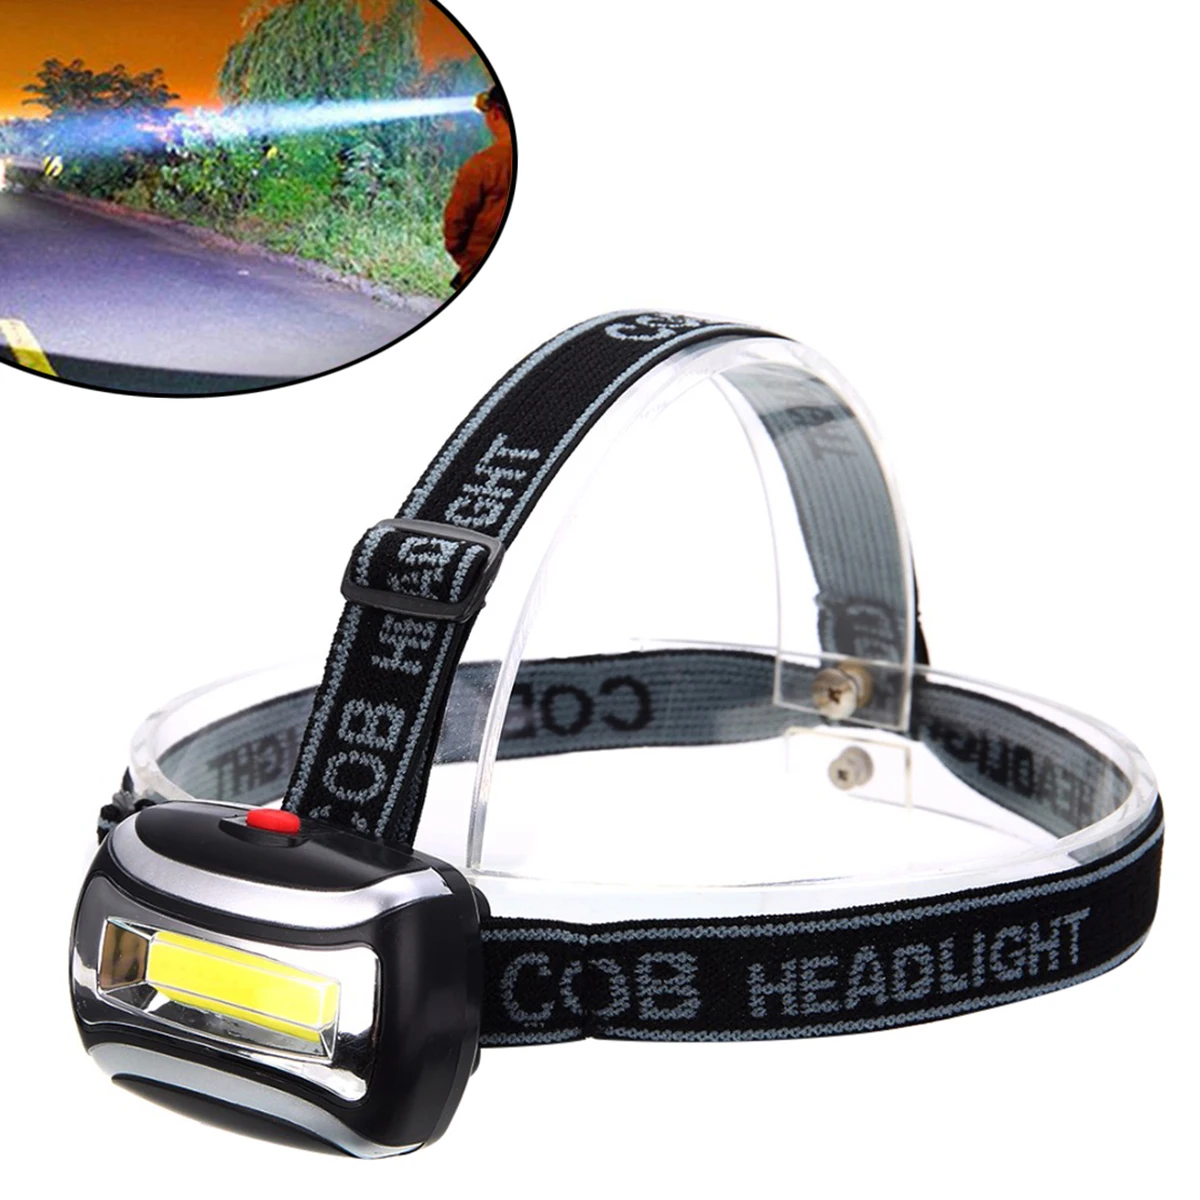 New Outdoor COB LED Headlamp Outdoor Working 3 Modes Headlight Head Flashlight Torch Black For Outdoor Camping Night Fishing